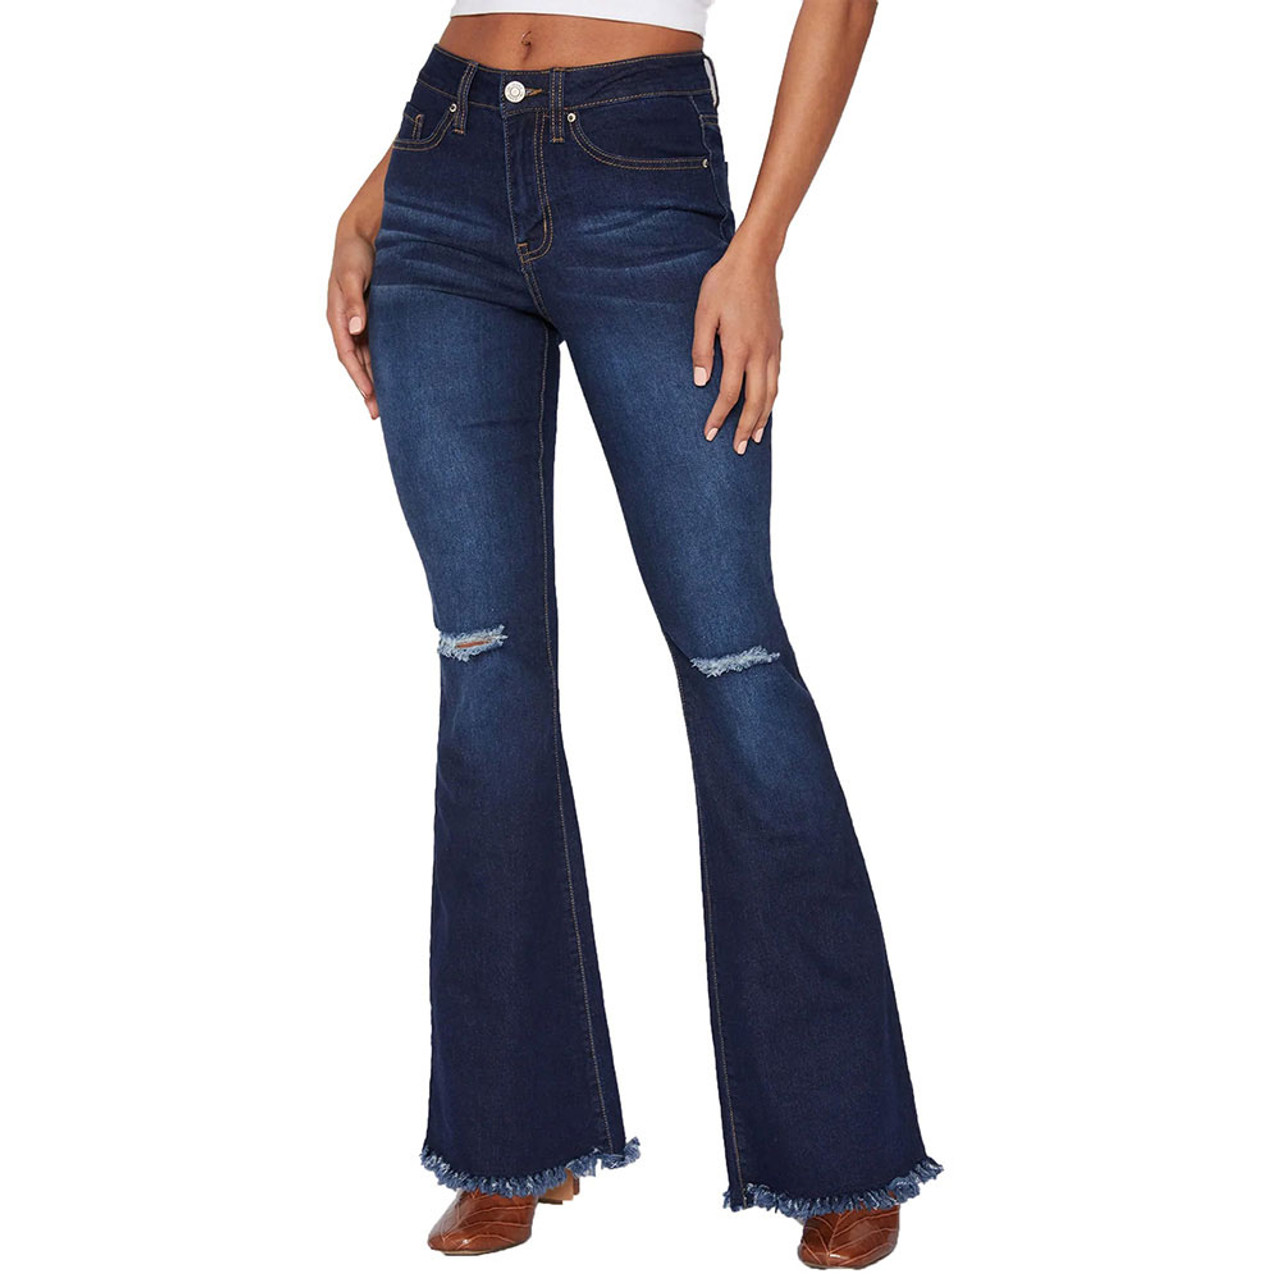 Women's Flare Jeans With Flap Back Pockets from YMI – YMI JEANS